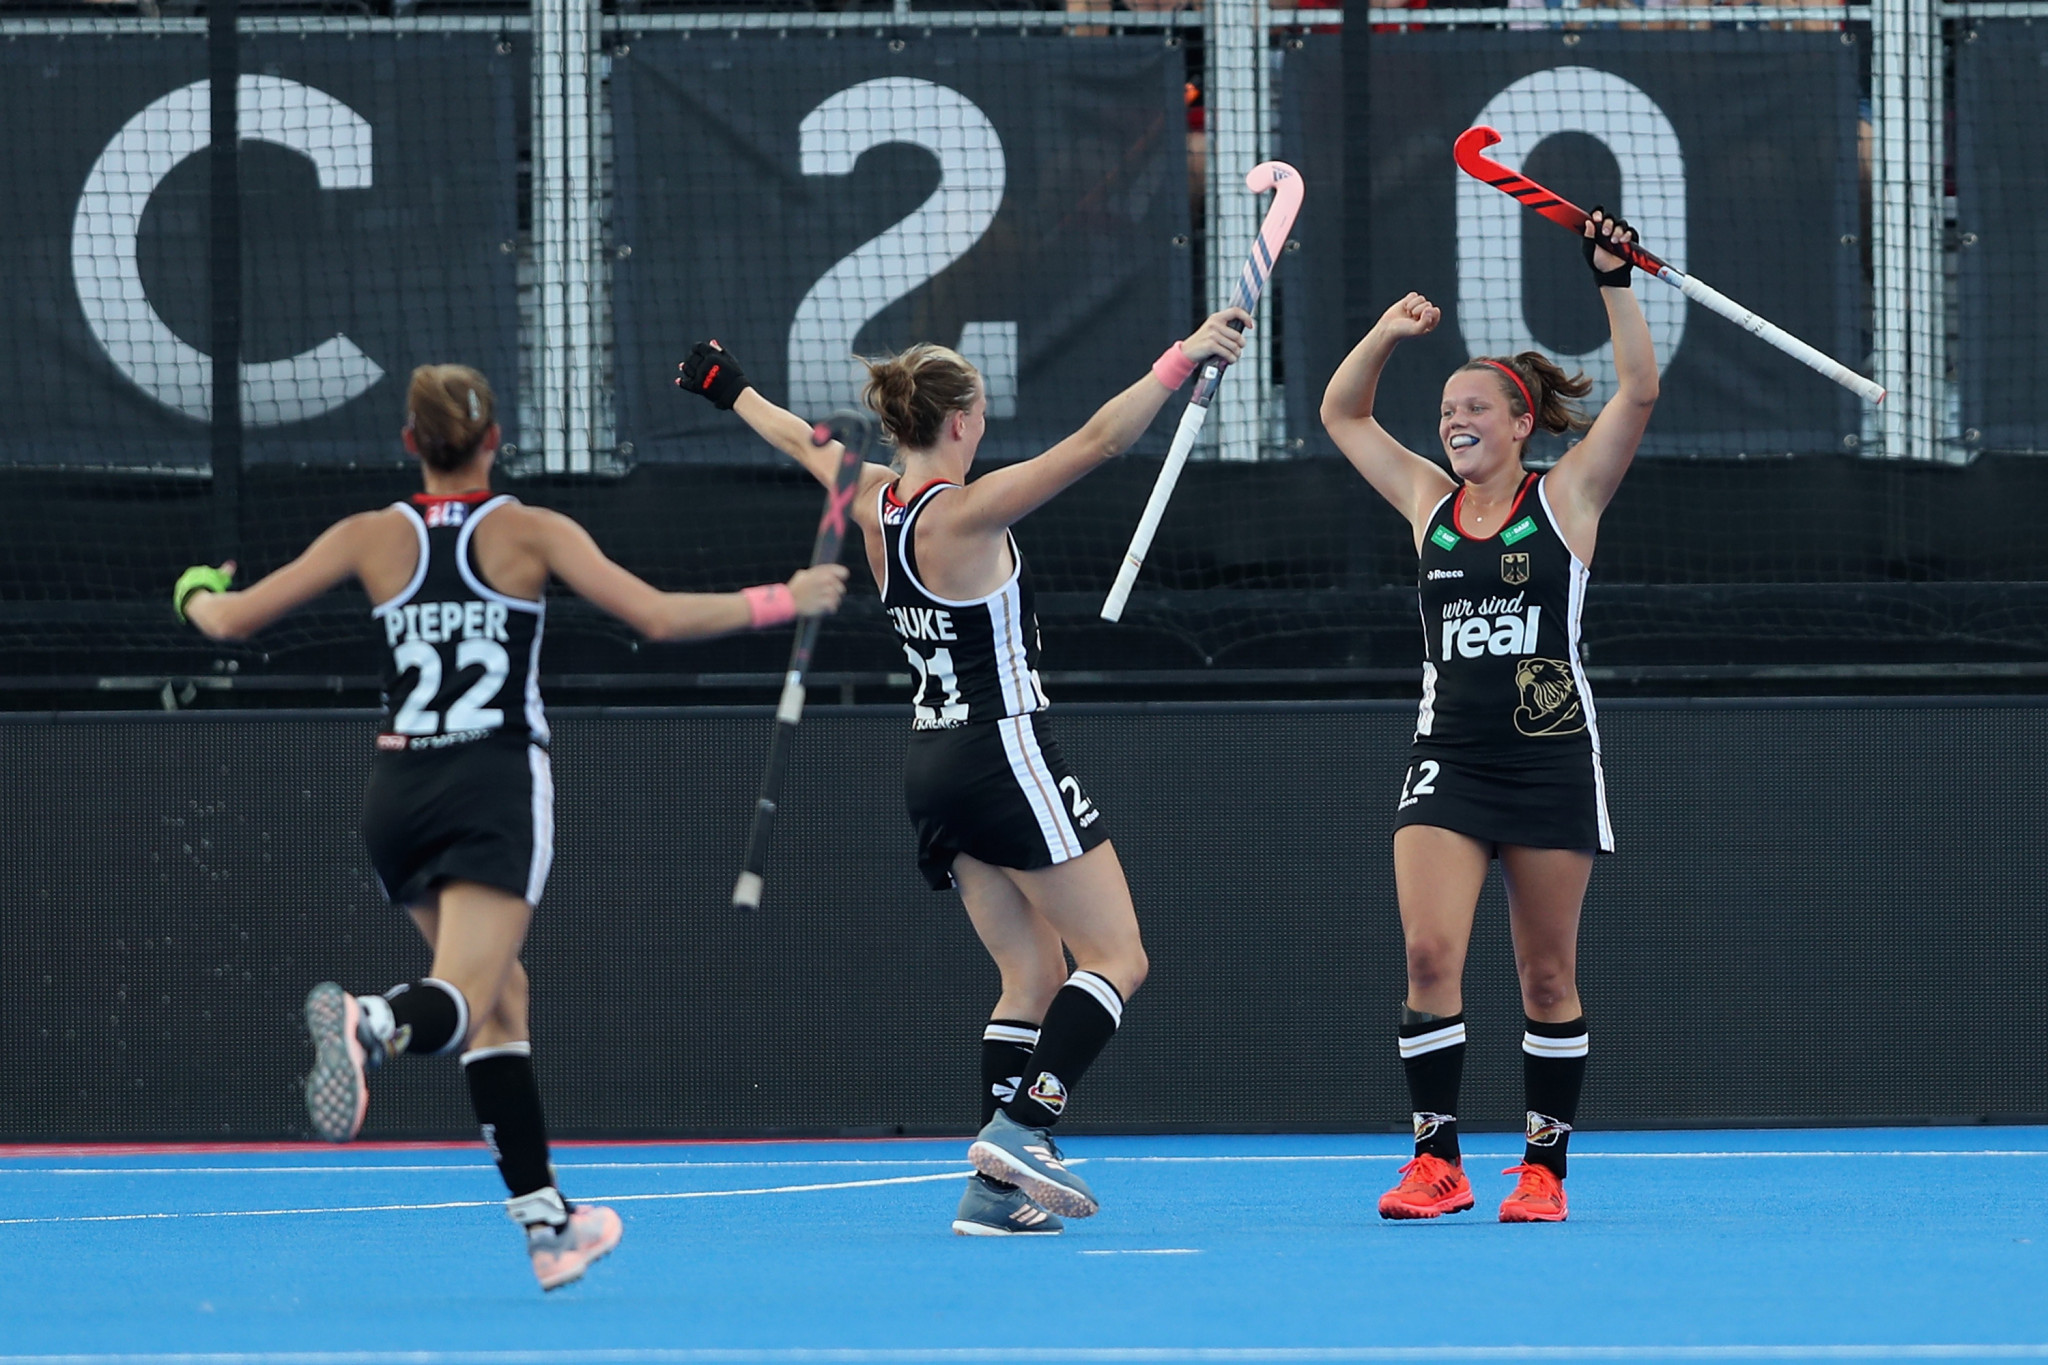 Germany beat Argentina to gain second win at FIH Women's Hockey World Cup